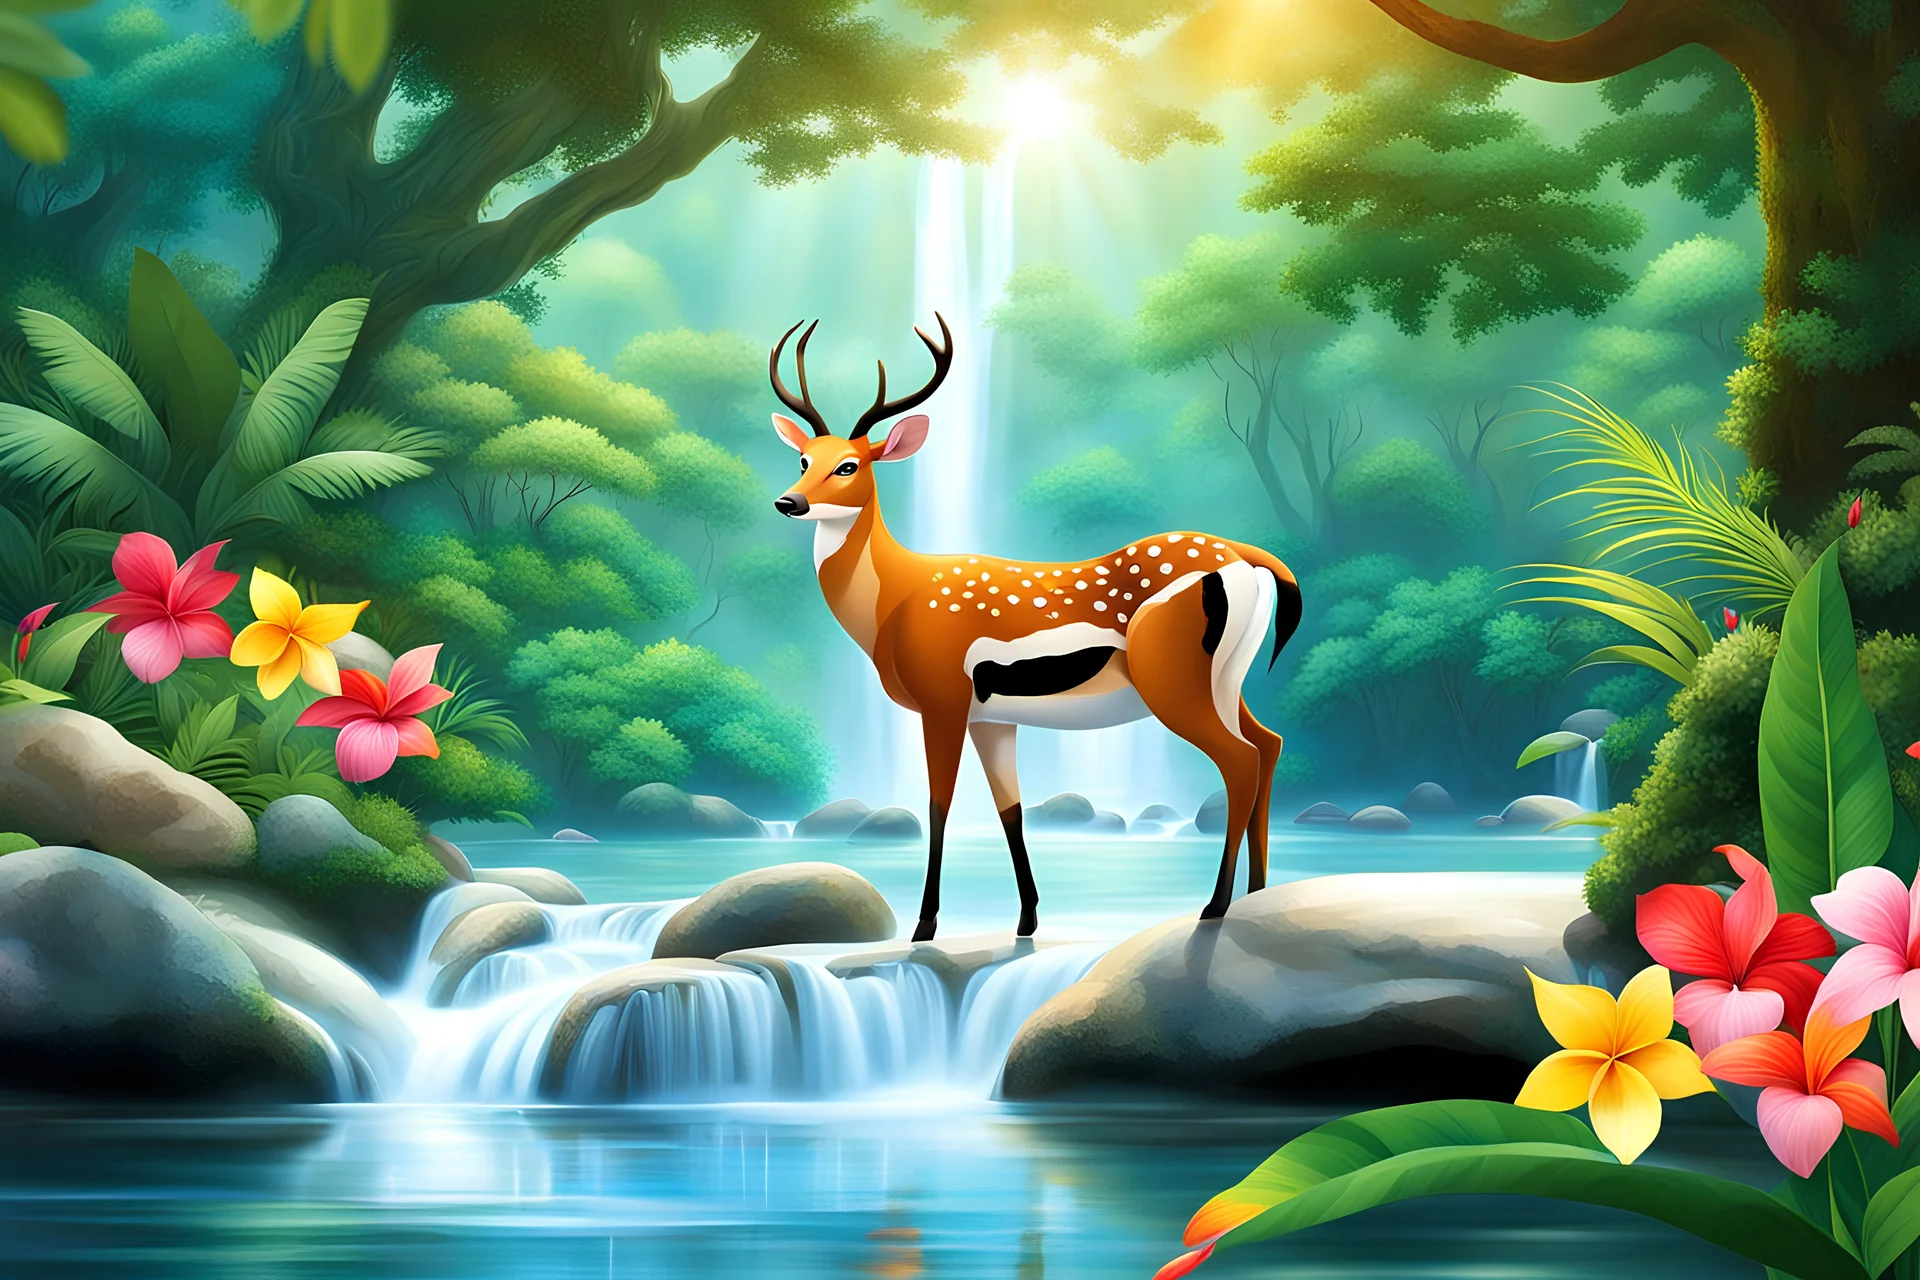 Create a realistic picture of a jungle with vibrant flowers and towering trees. Include beautiful animals like colorful birds, playful monkeys, and graceful deer. Add a winding river with crystal-clear, wavy water flowing gently over smooth rocks on the riverbed and a very beautiful girl standing in water. Let the sunlight filter through the canopy, casting a warm glow on this serene and enchanting landscape.